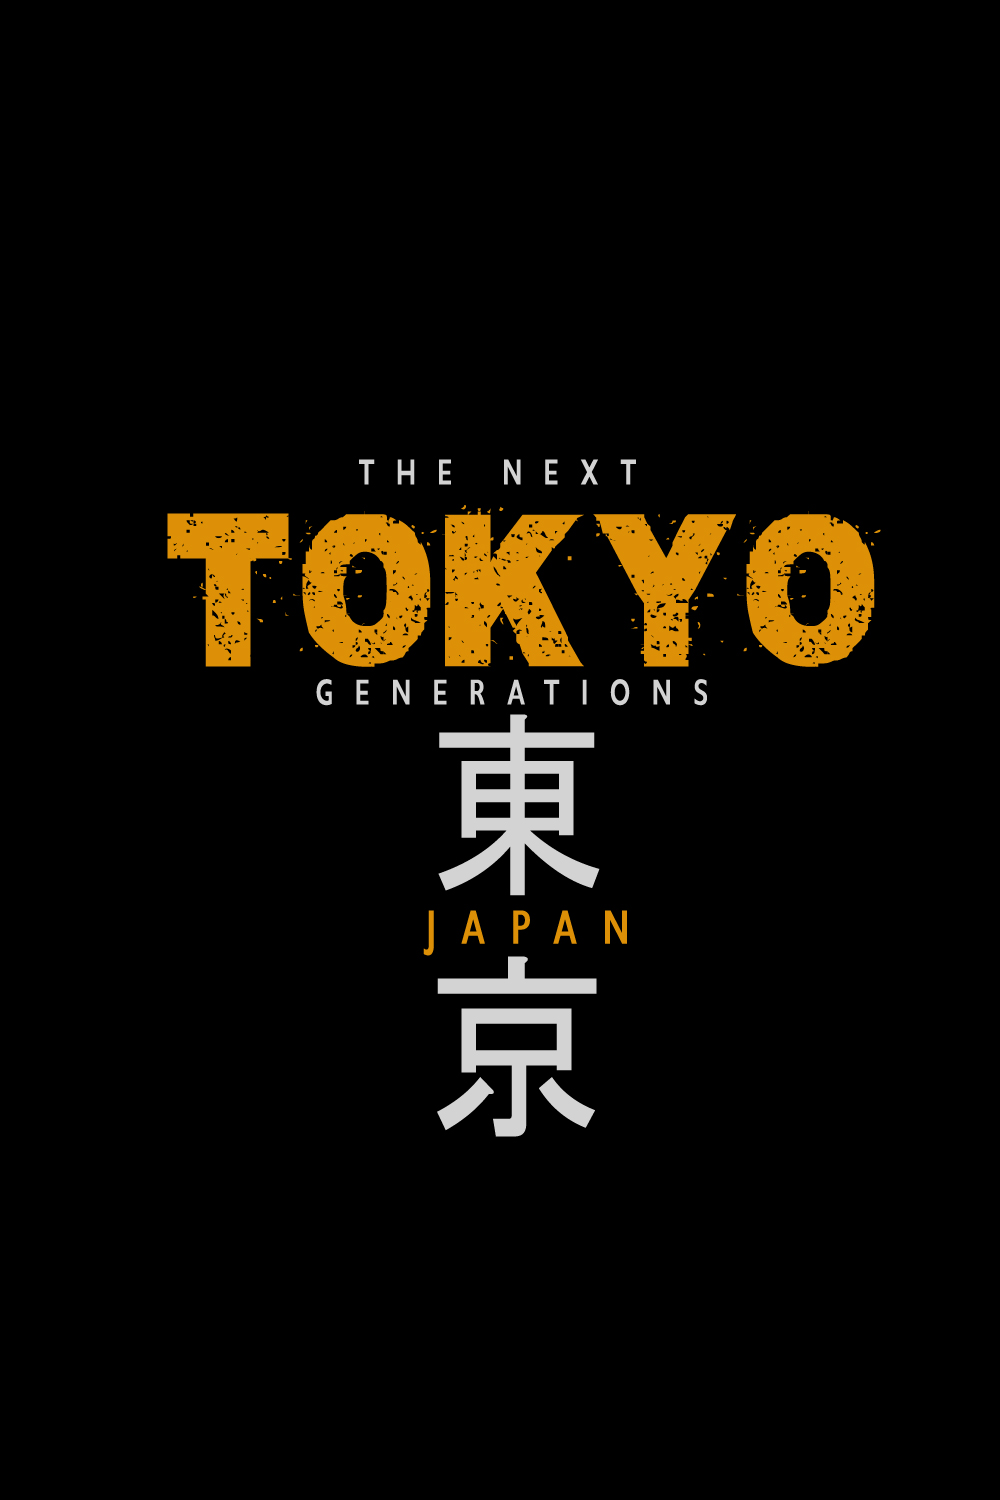 tokyo typography t shirt design pinterest preview image.